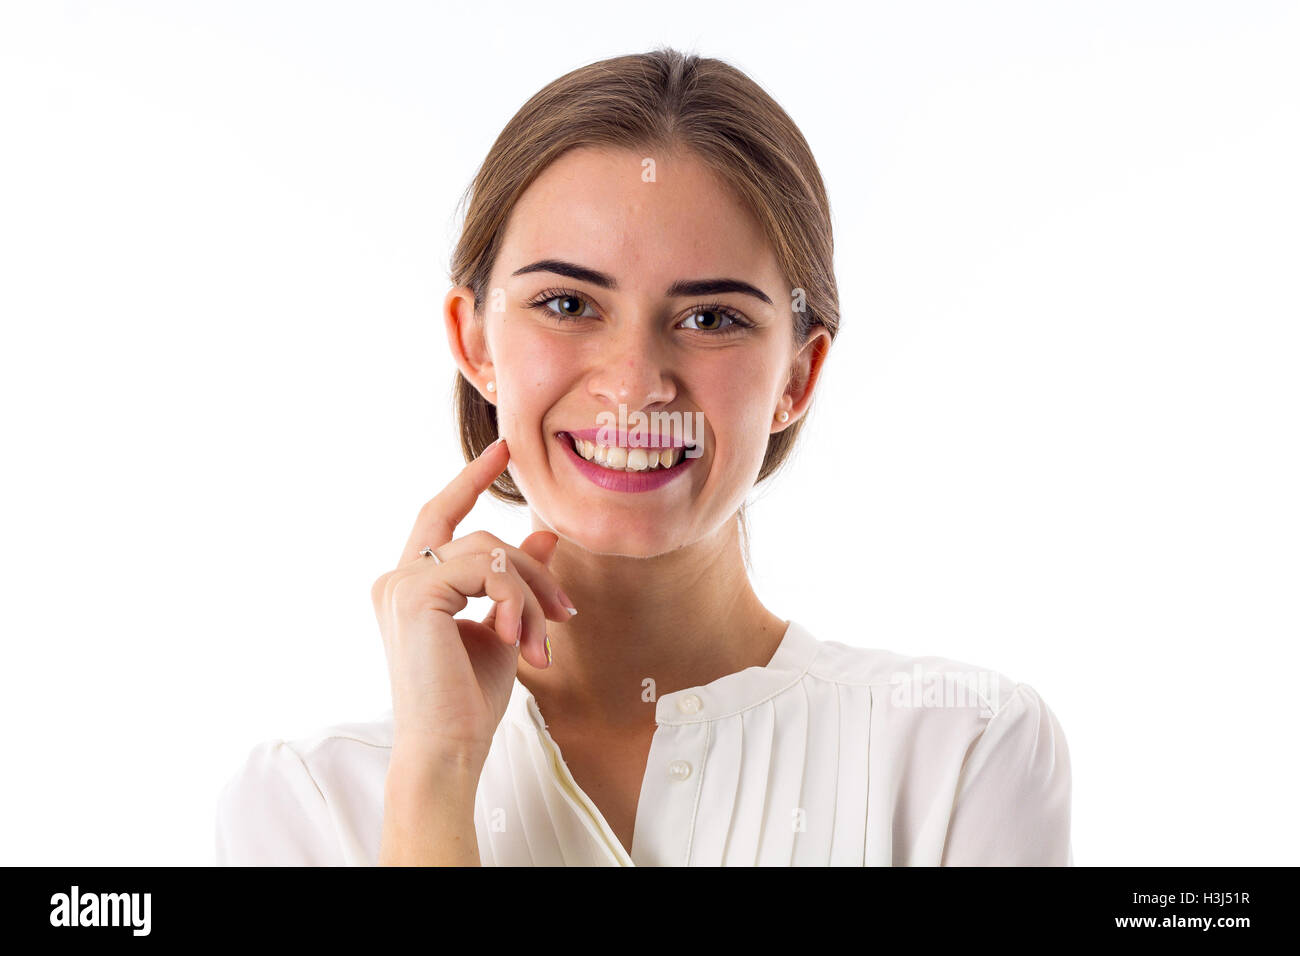 Smiling woman holding hand near the face Stock Photo